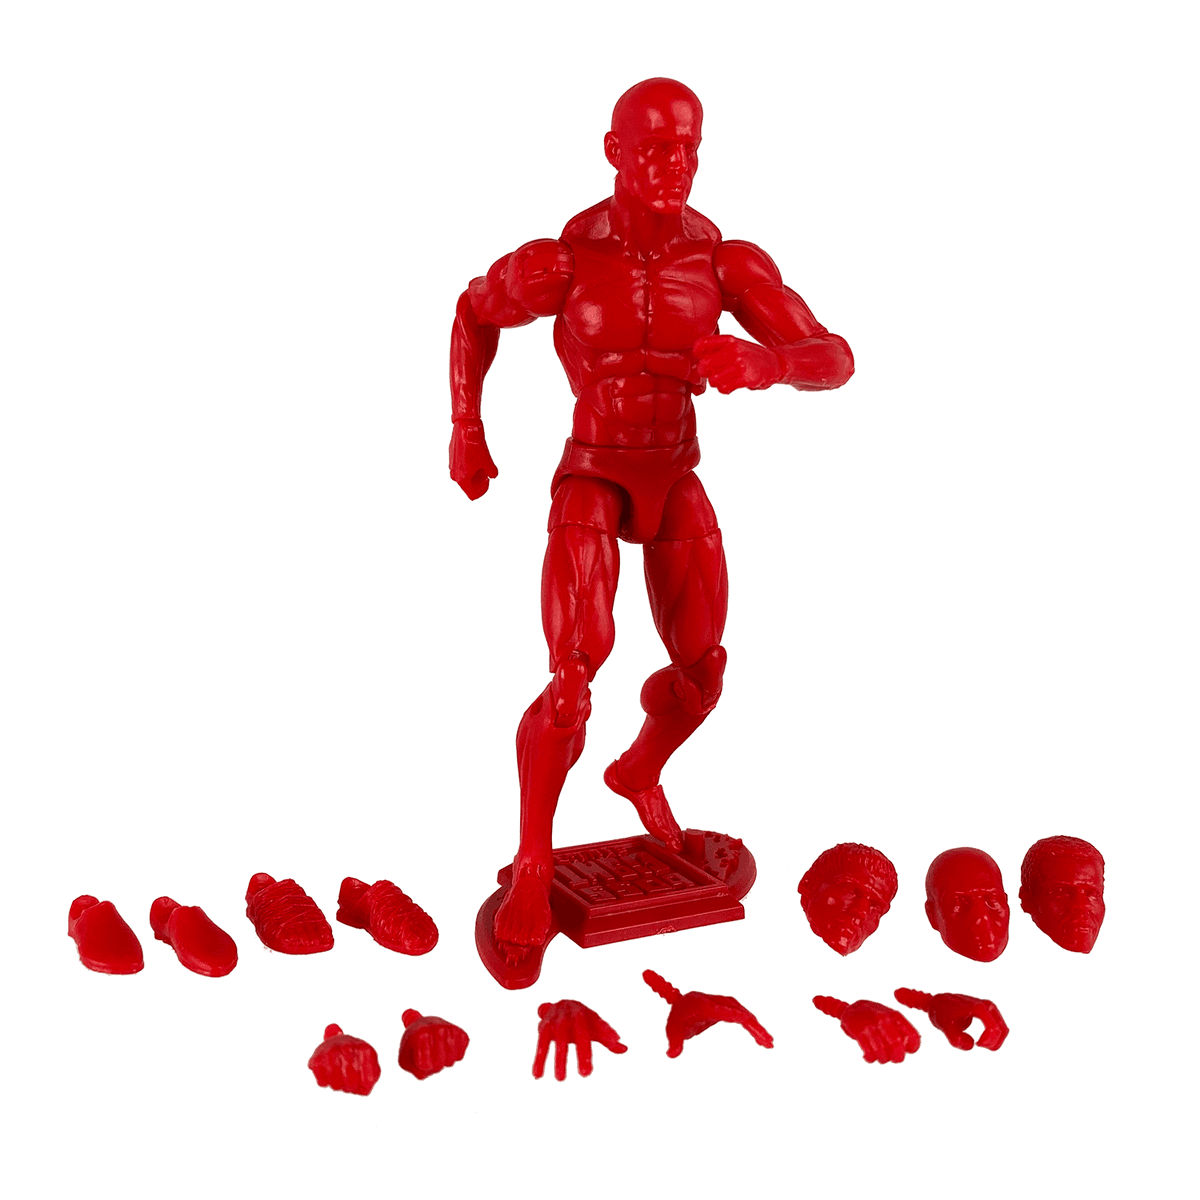 Want to add some superhero magic to your shelf? Introducing our Superhero Red blank action figures – the ultimate canvas, complete with all the essentials to craft legendary characters. Female: tinyurl.com/3mvb7ux3 Male: tinyurl.com/y4eyhjb8